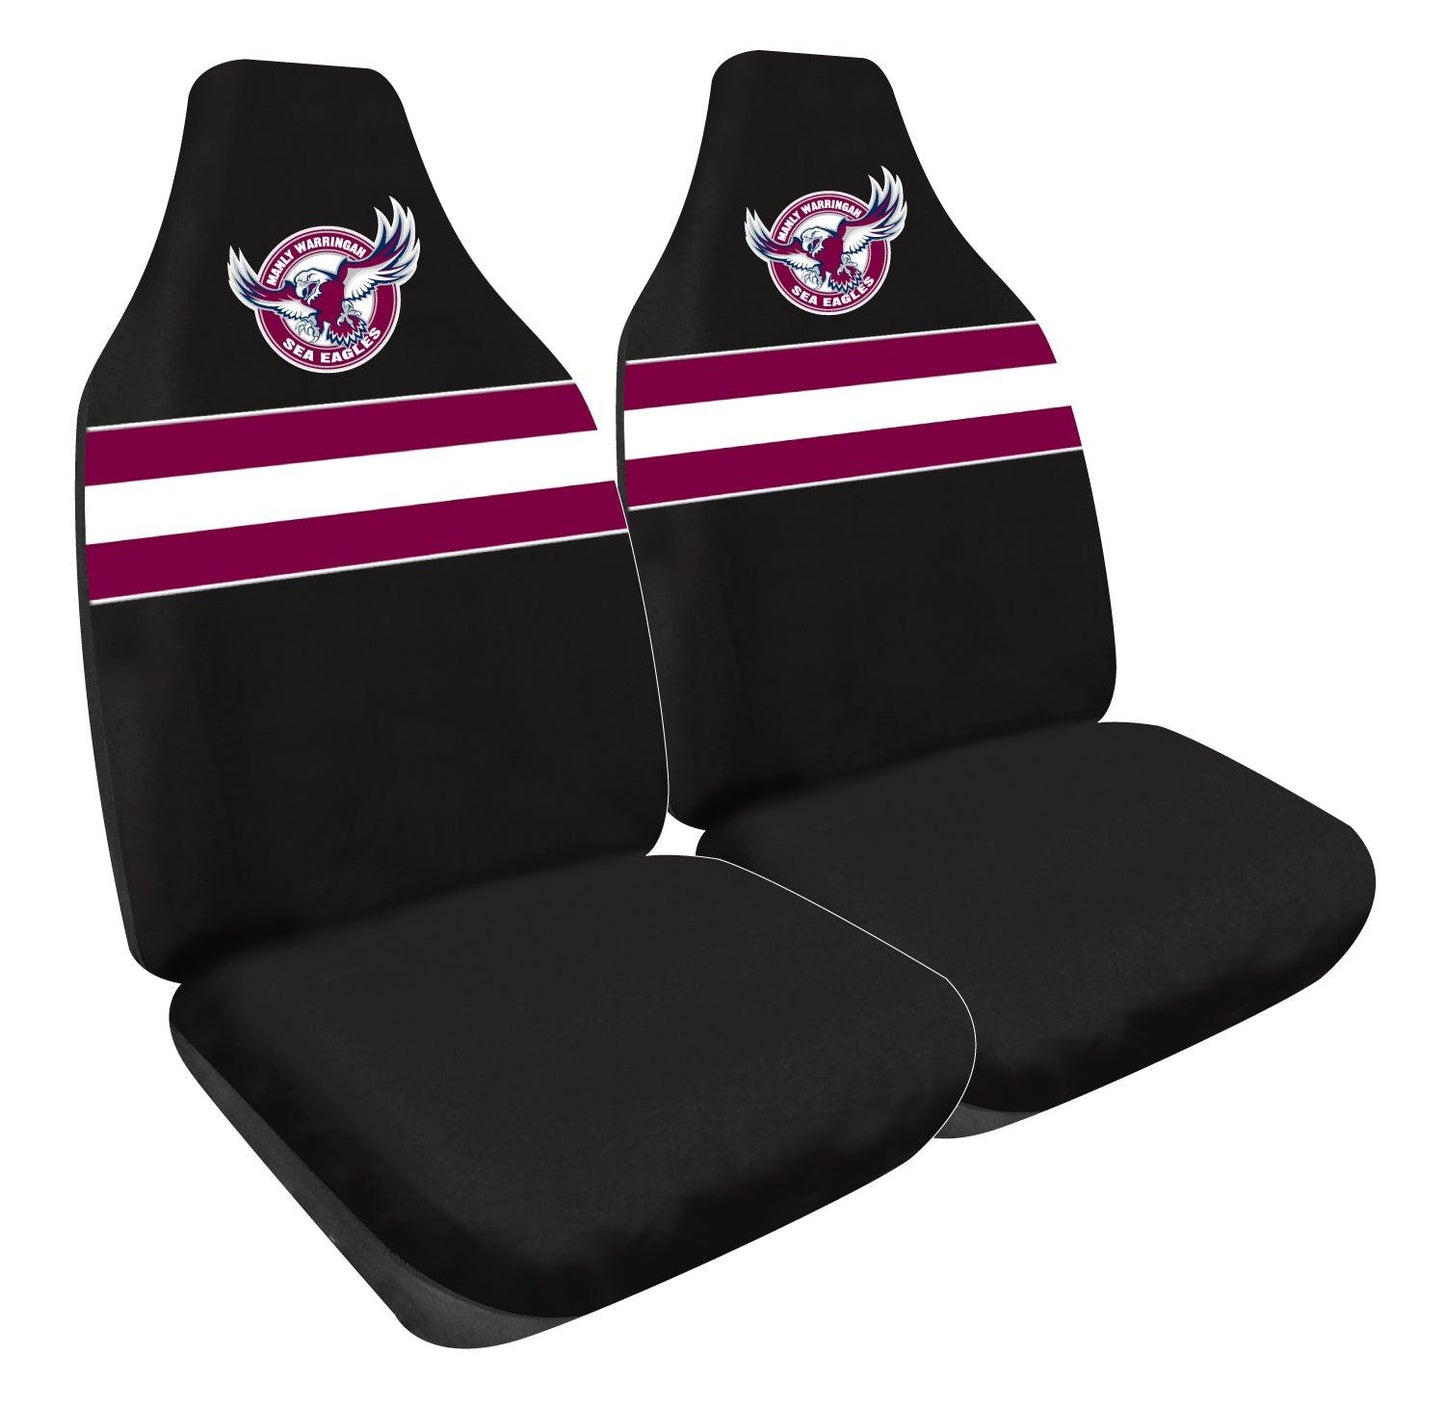 Load image into Gallery viewer, Manly Sea Eagles Car Seat Covers
